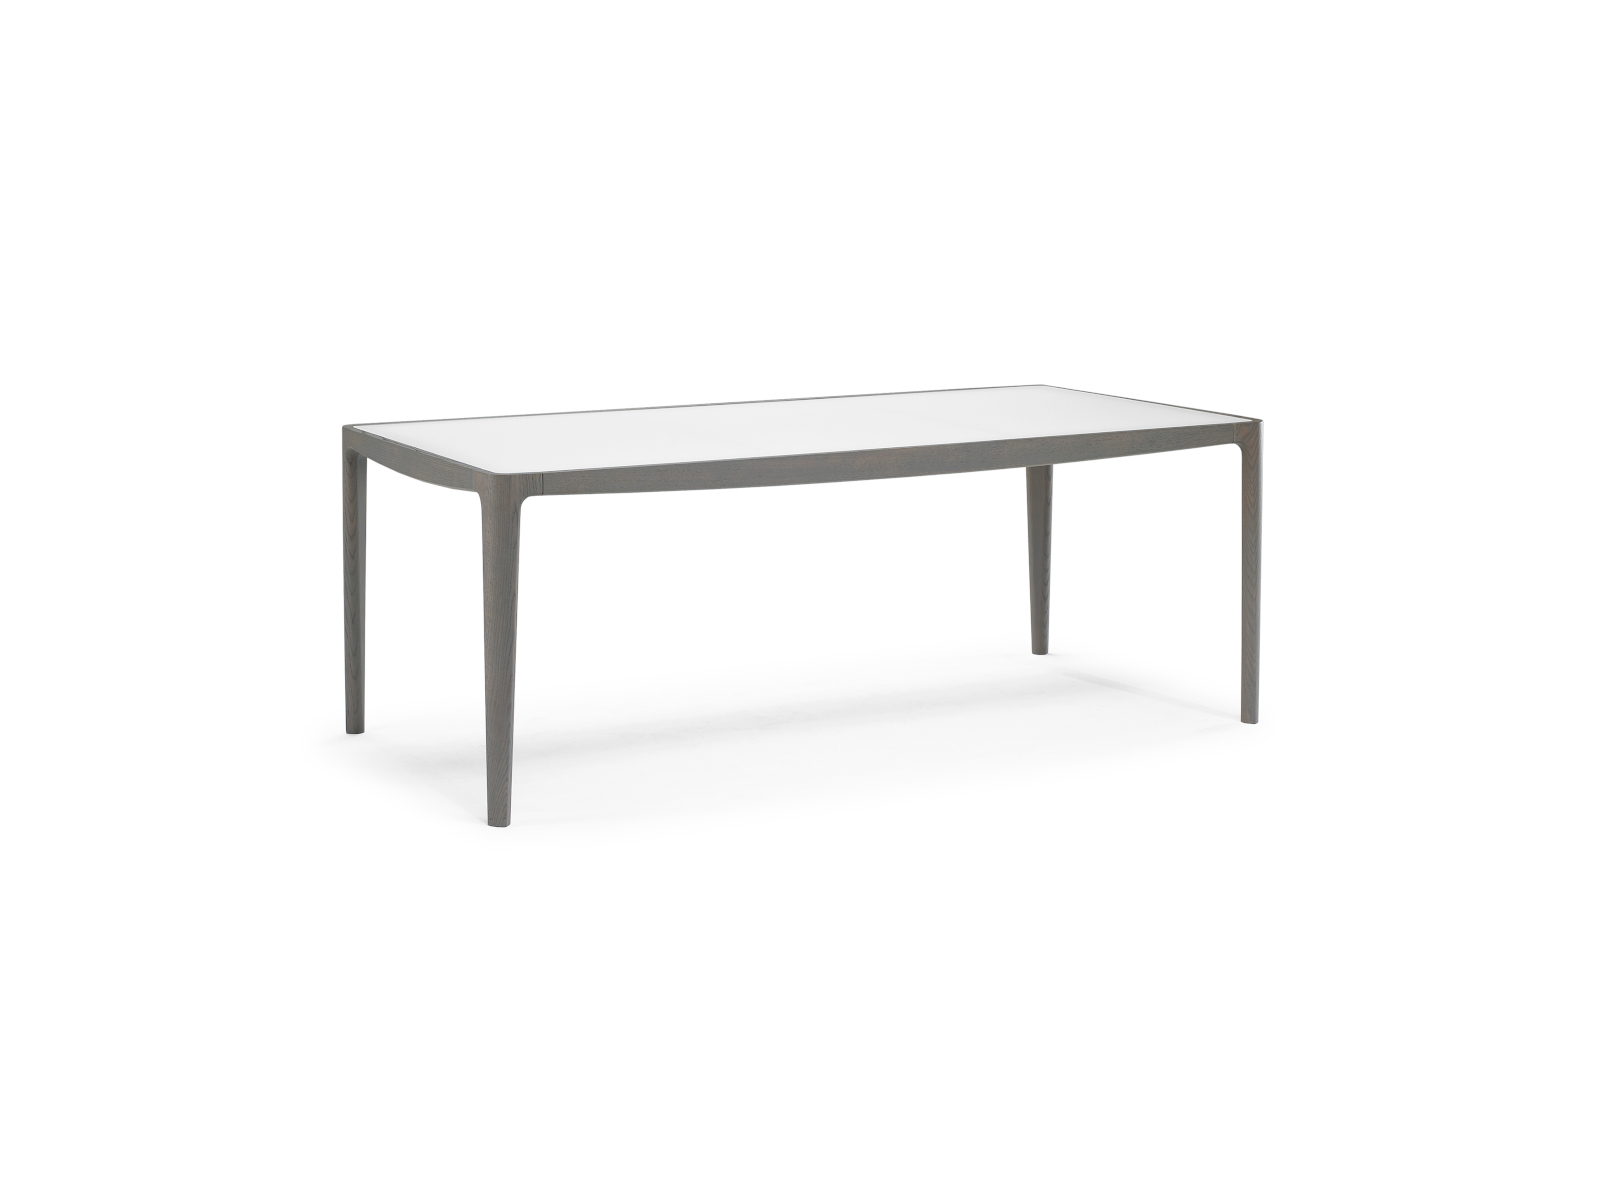 Preset default image - NEW SATURNO Dining table